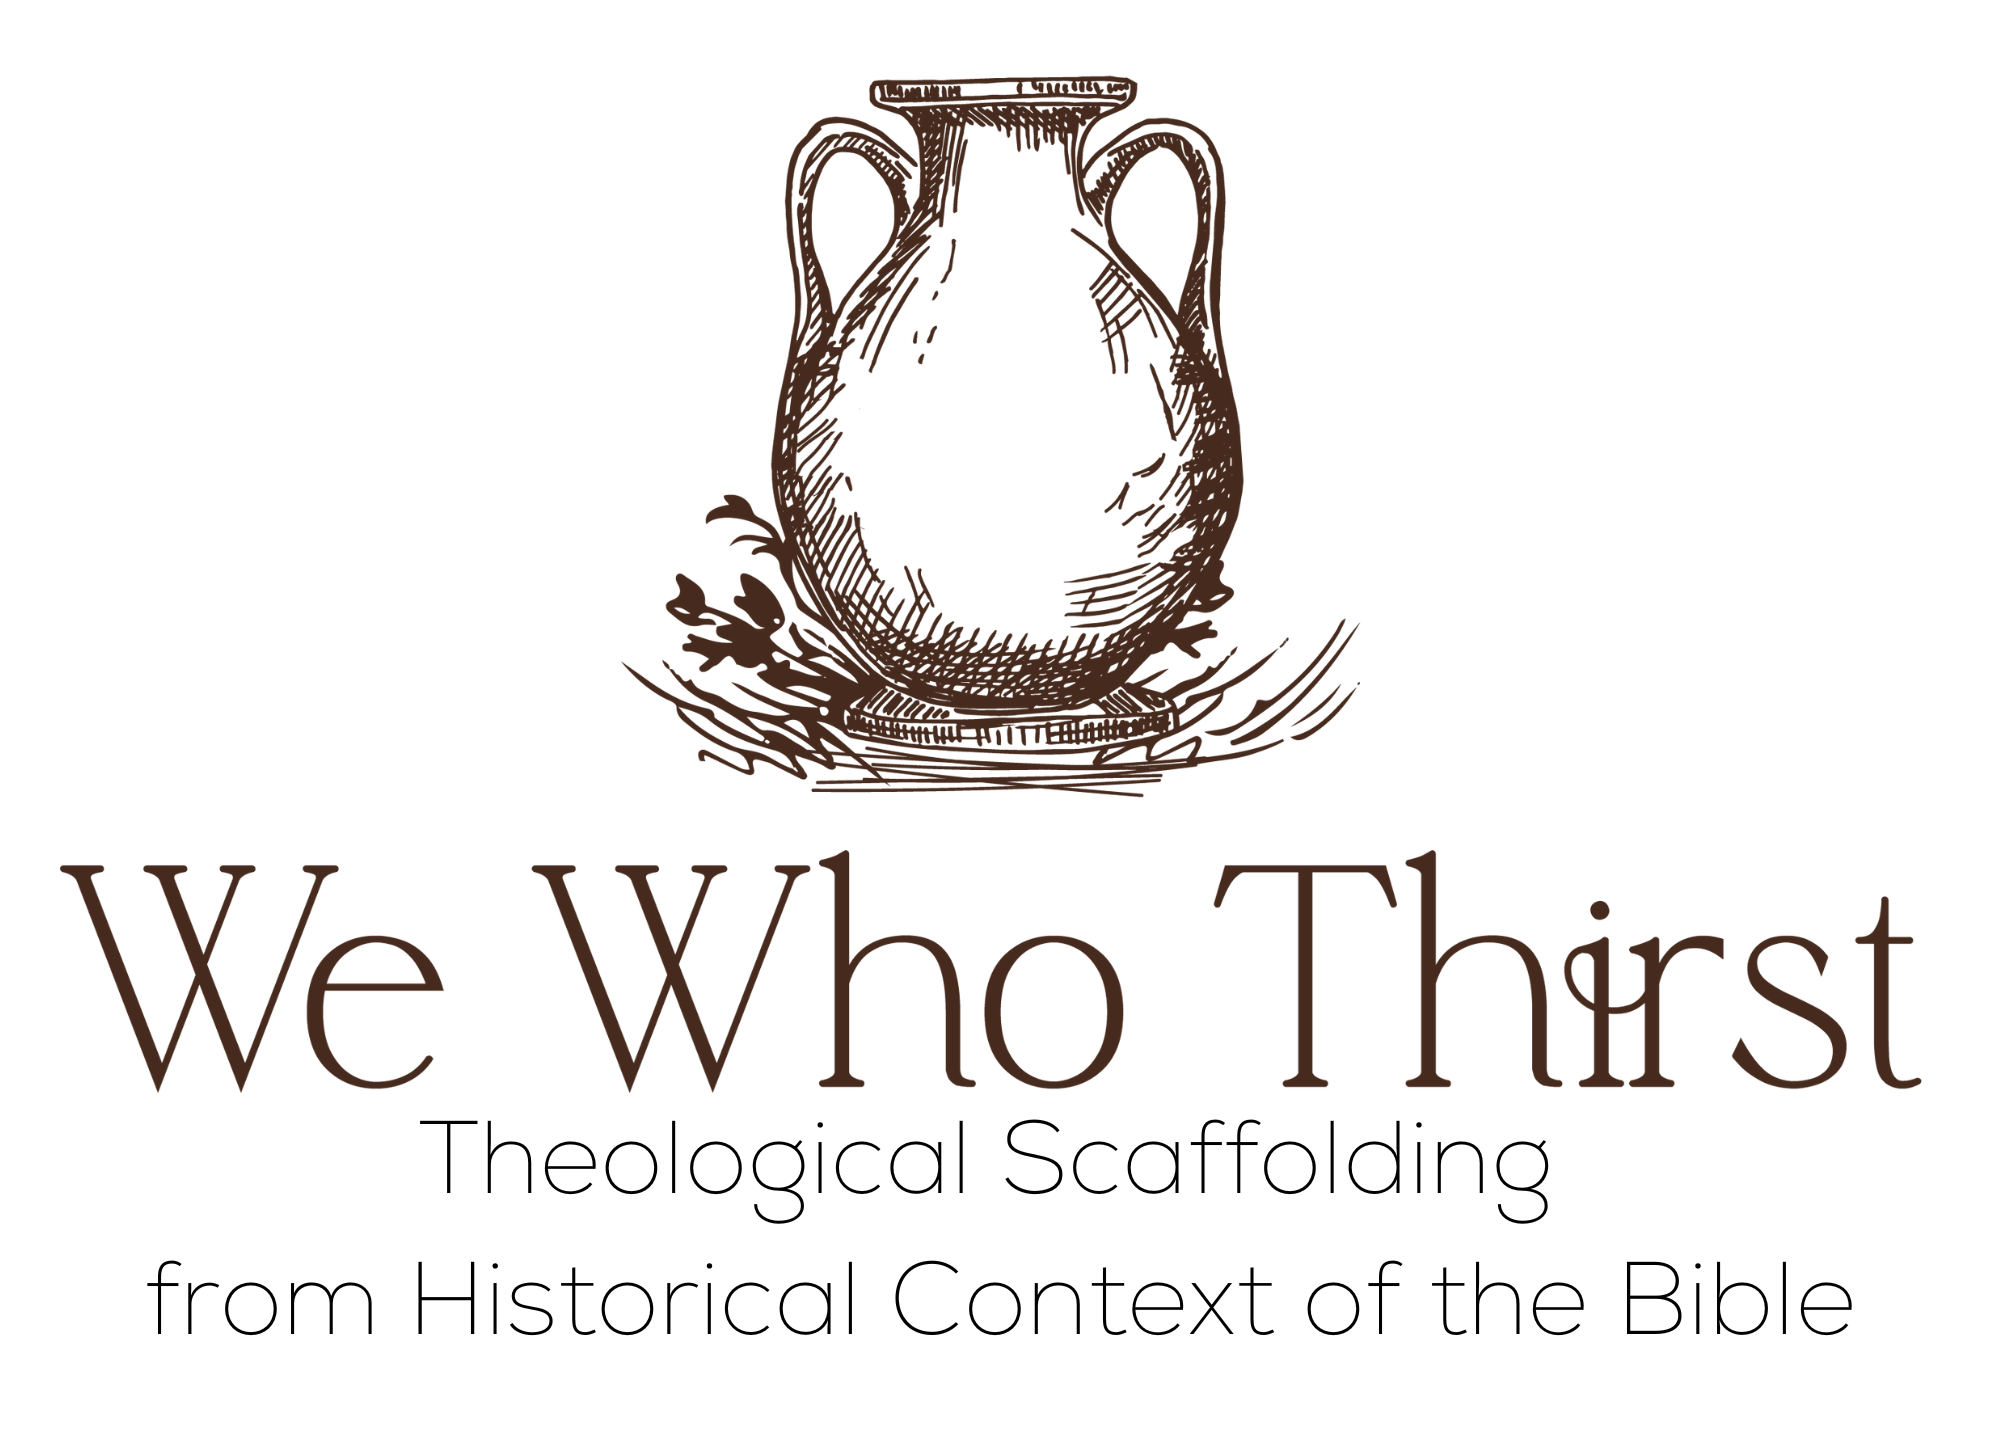 We Who Thirst Image shows a picture of an ancient clay pot with the words "We Who Thirst - Theological Scaffolding from Historical Context of the Bible" underneight